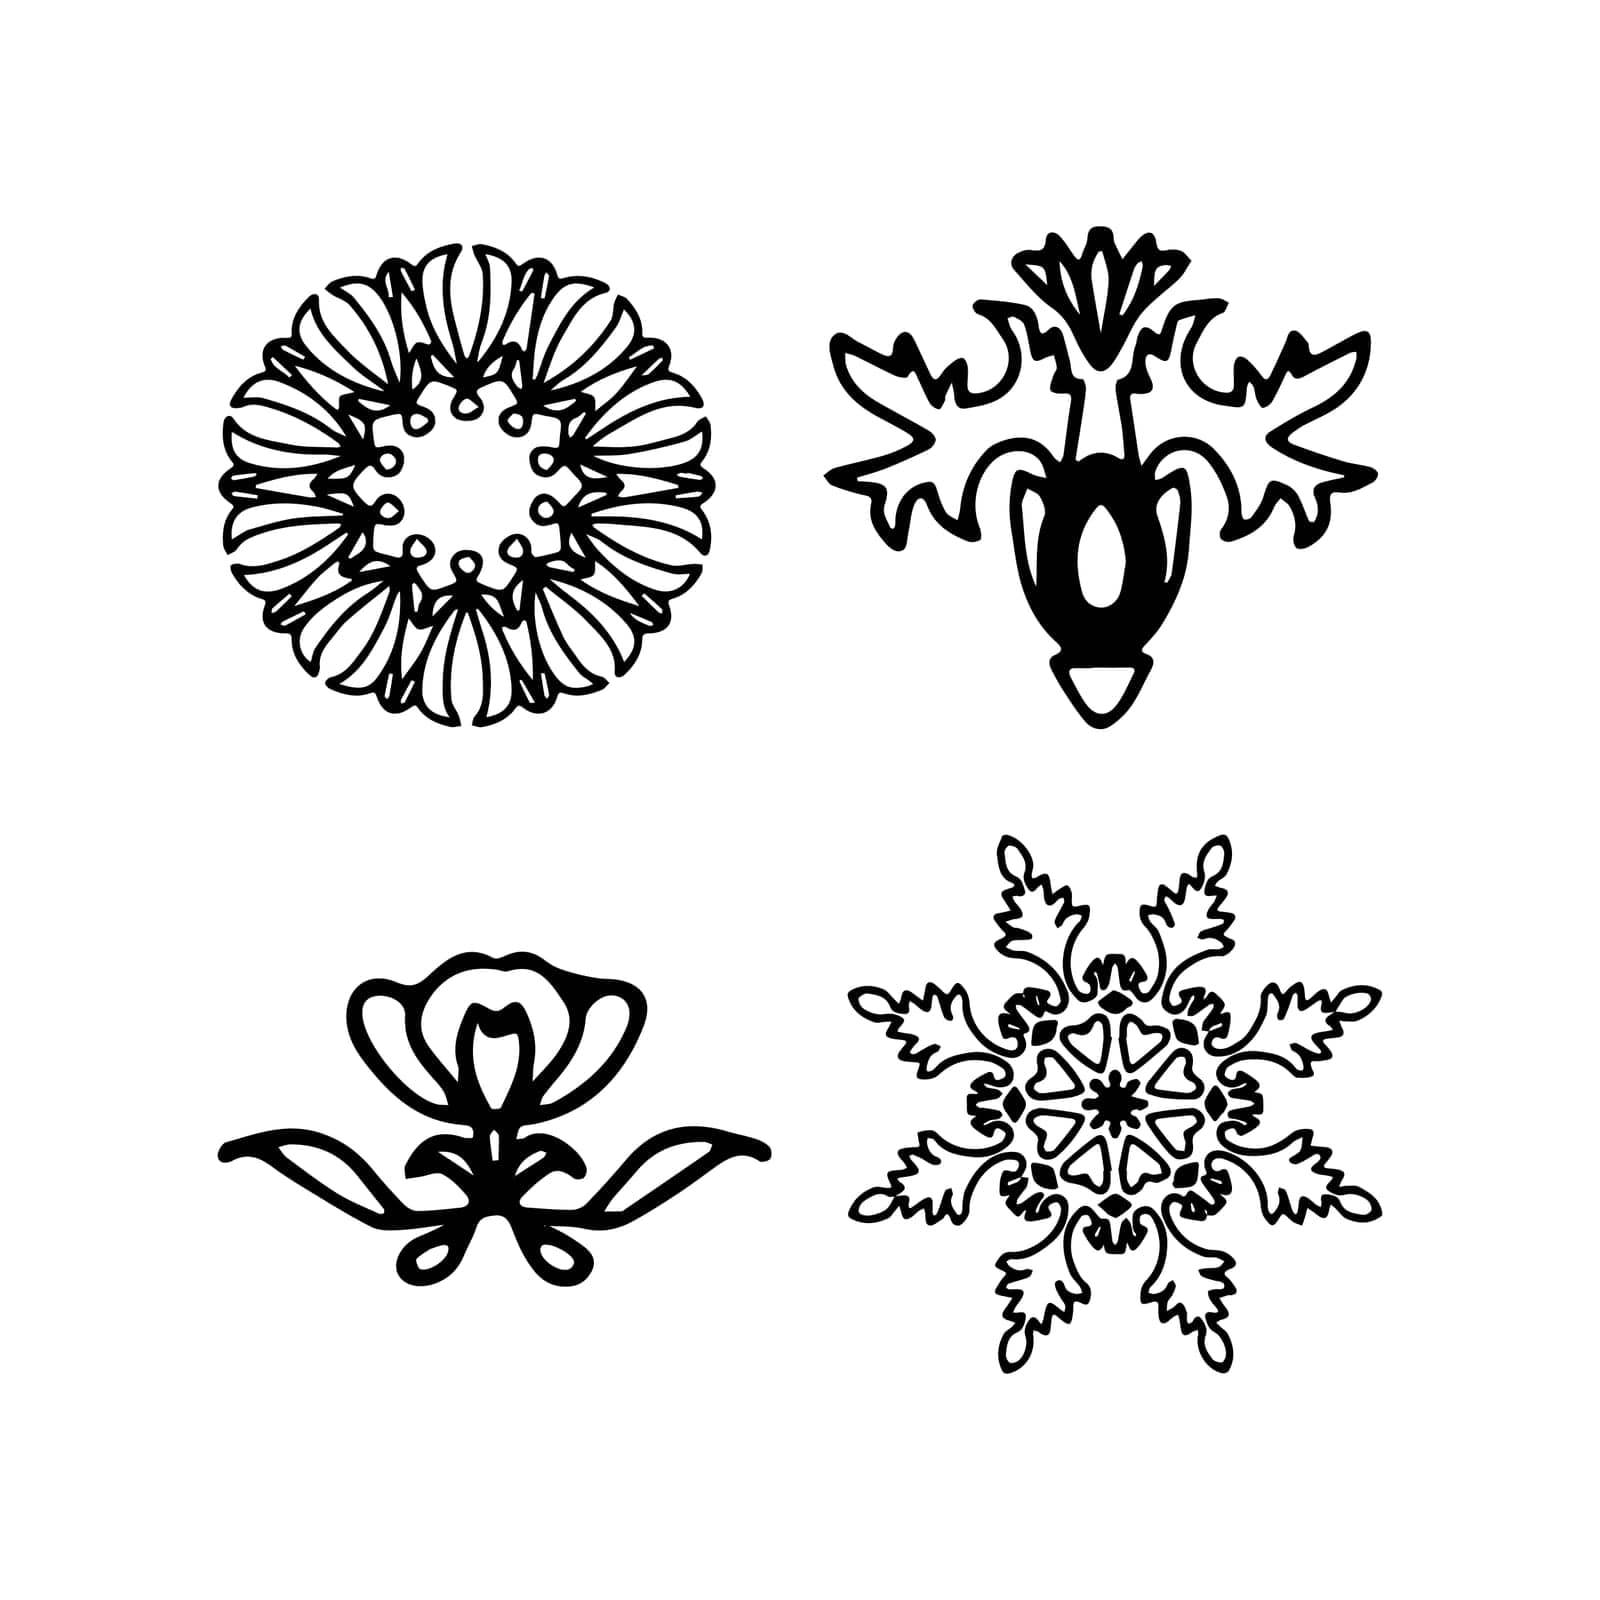 Mandala soul abstract Objects set for logo Isolated On White background. Ethnic decorative Lace and floral element